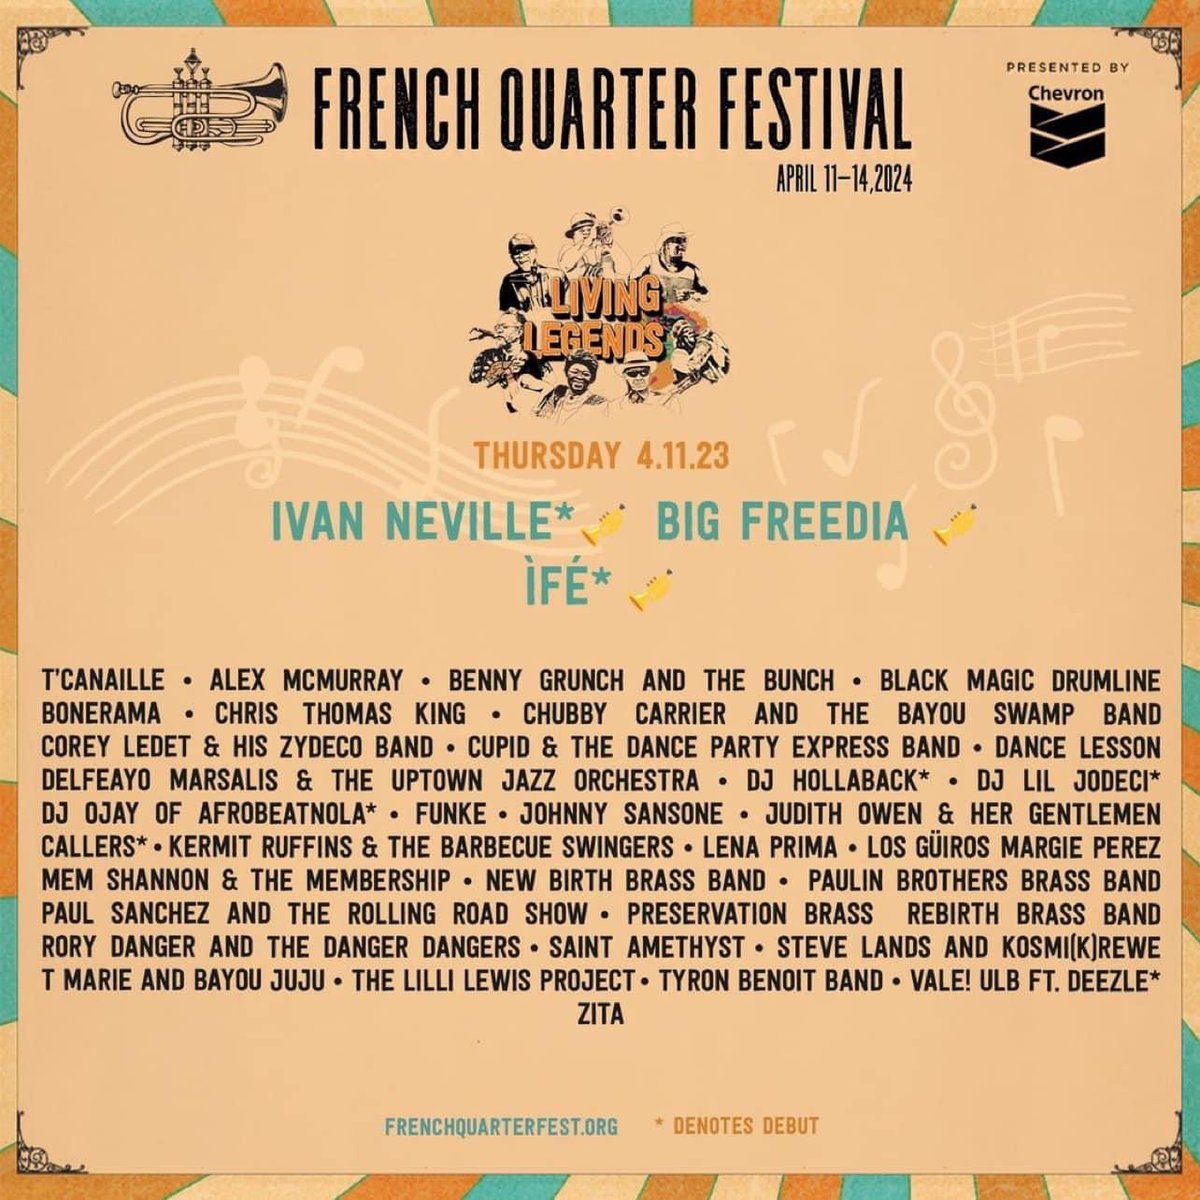 Yes indeed ya’ll!! #IvanNeville & Friends at the #FrenchQuarterFestival this Thu., 4/11 down in #NewOrleans, the #GreatestPlaceOnEarth ⚜️⚜️⚜️ Free Admission 🎫 or grab your VIP Experience tickets on sale now!! frenchquarterfest.org #nola #ivannevilleandfriends #frenchquarter